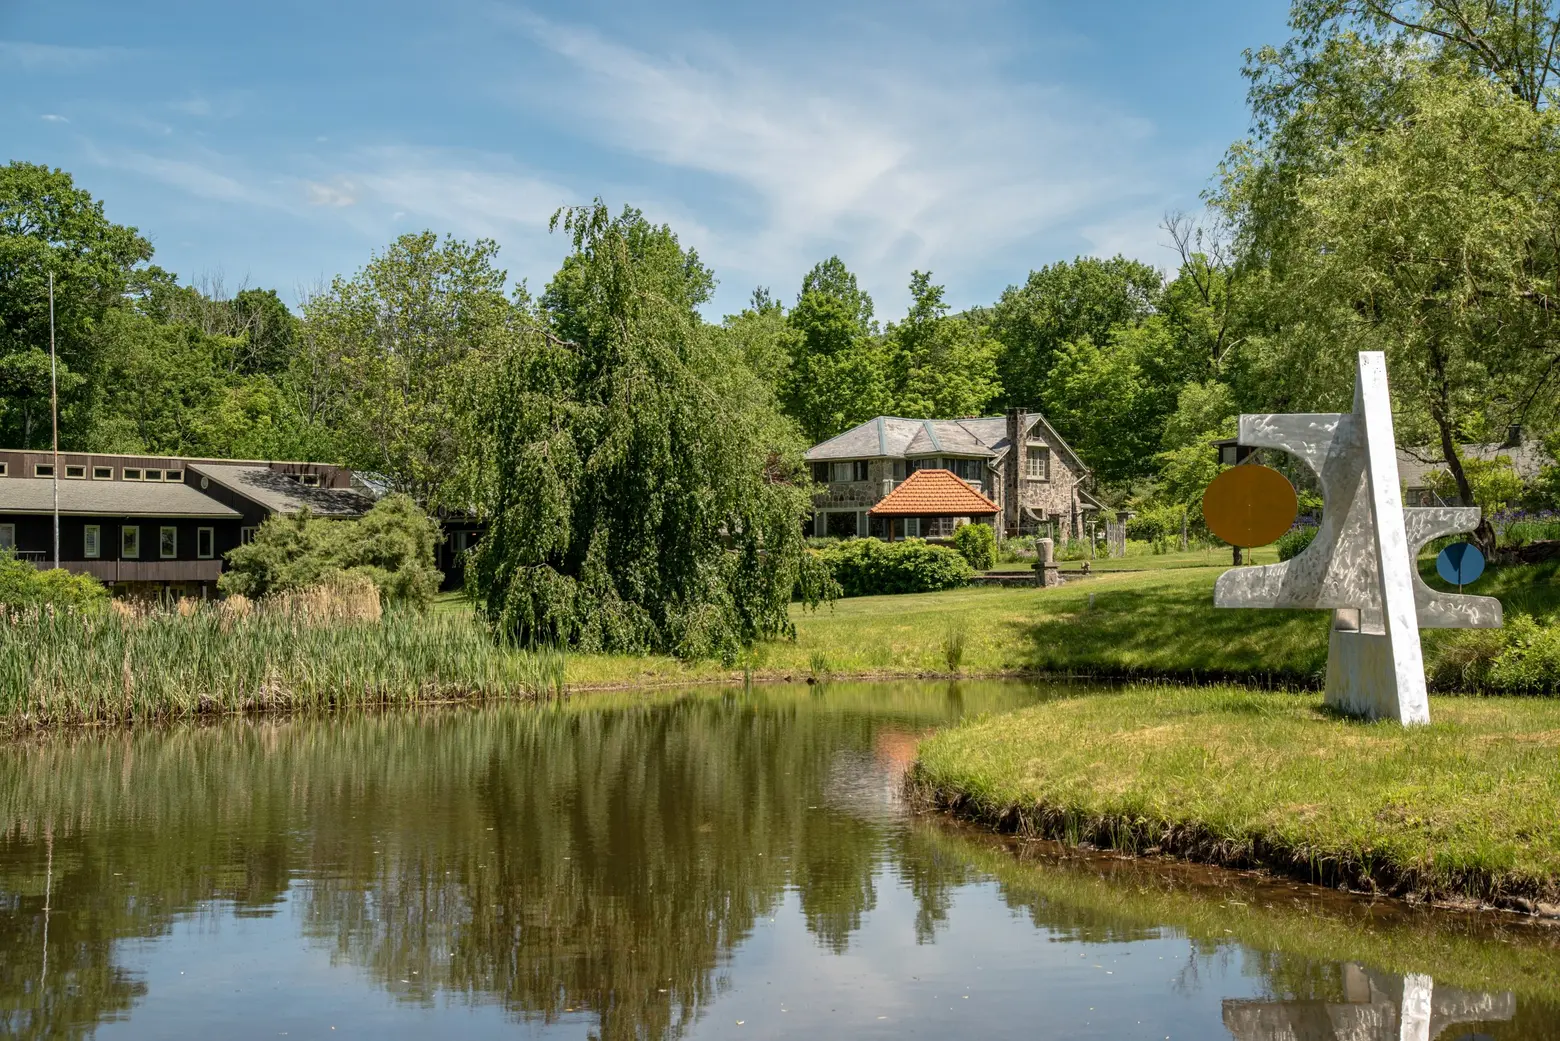 For $2.5M, this Woodstock estate comes with three stone homes, a koi pond, a treehouse, and more